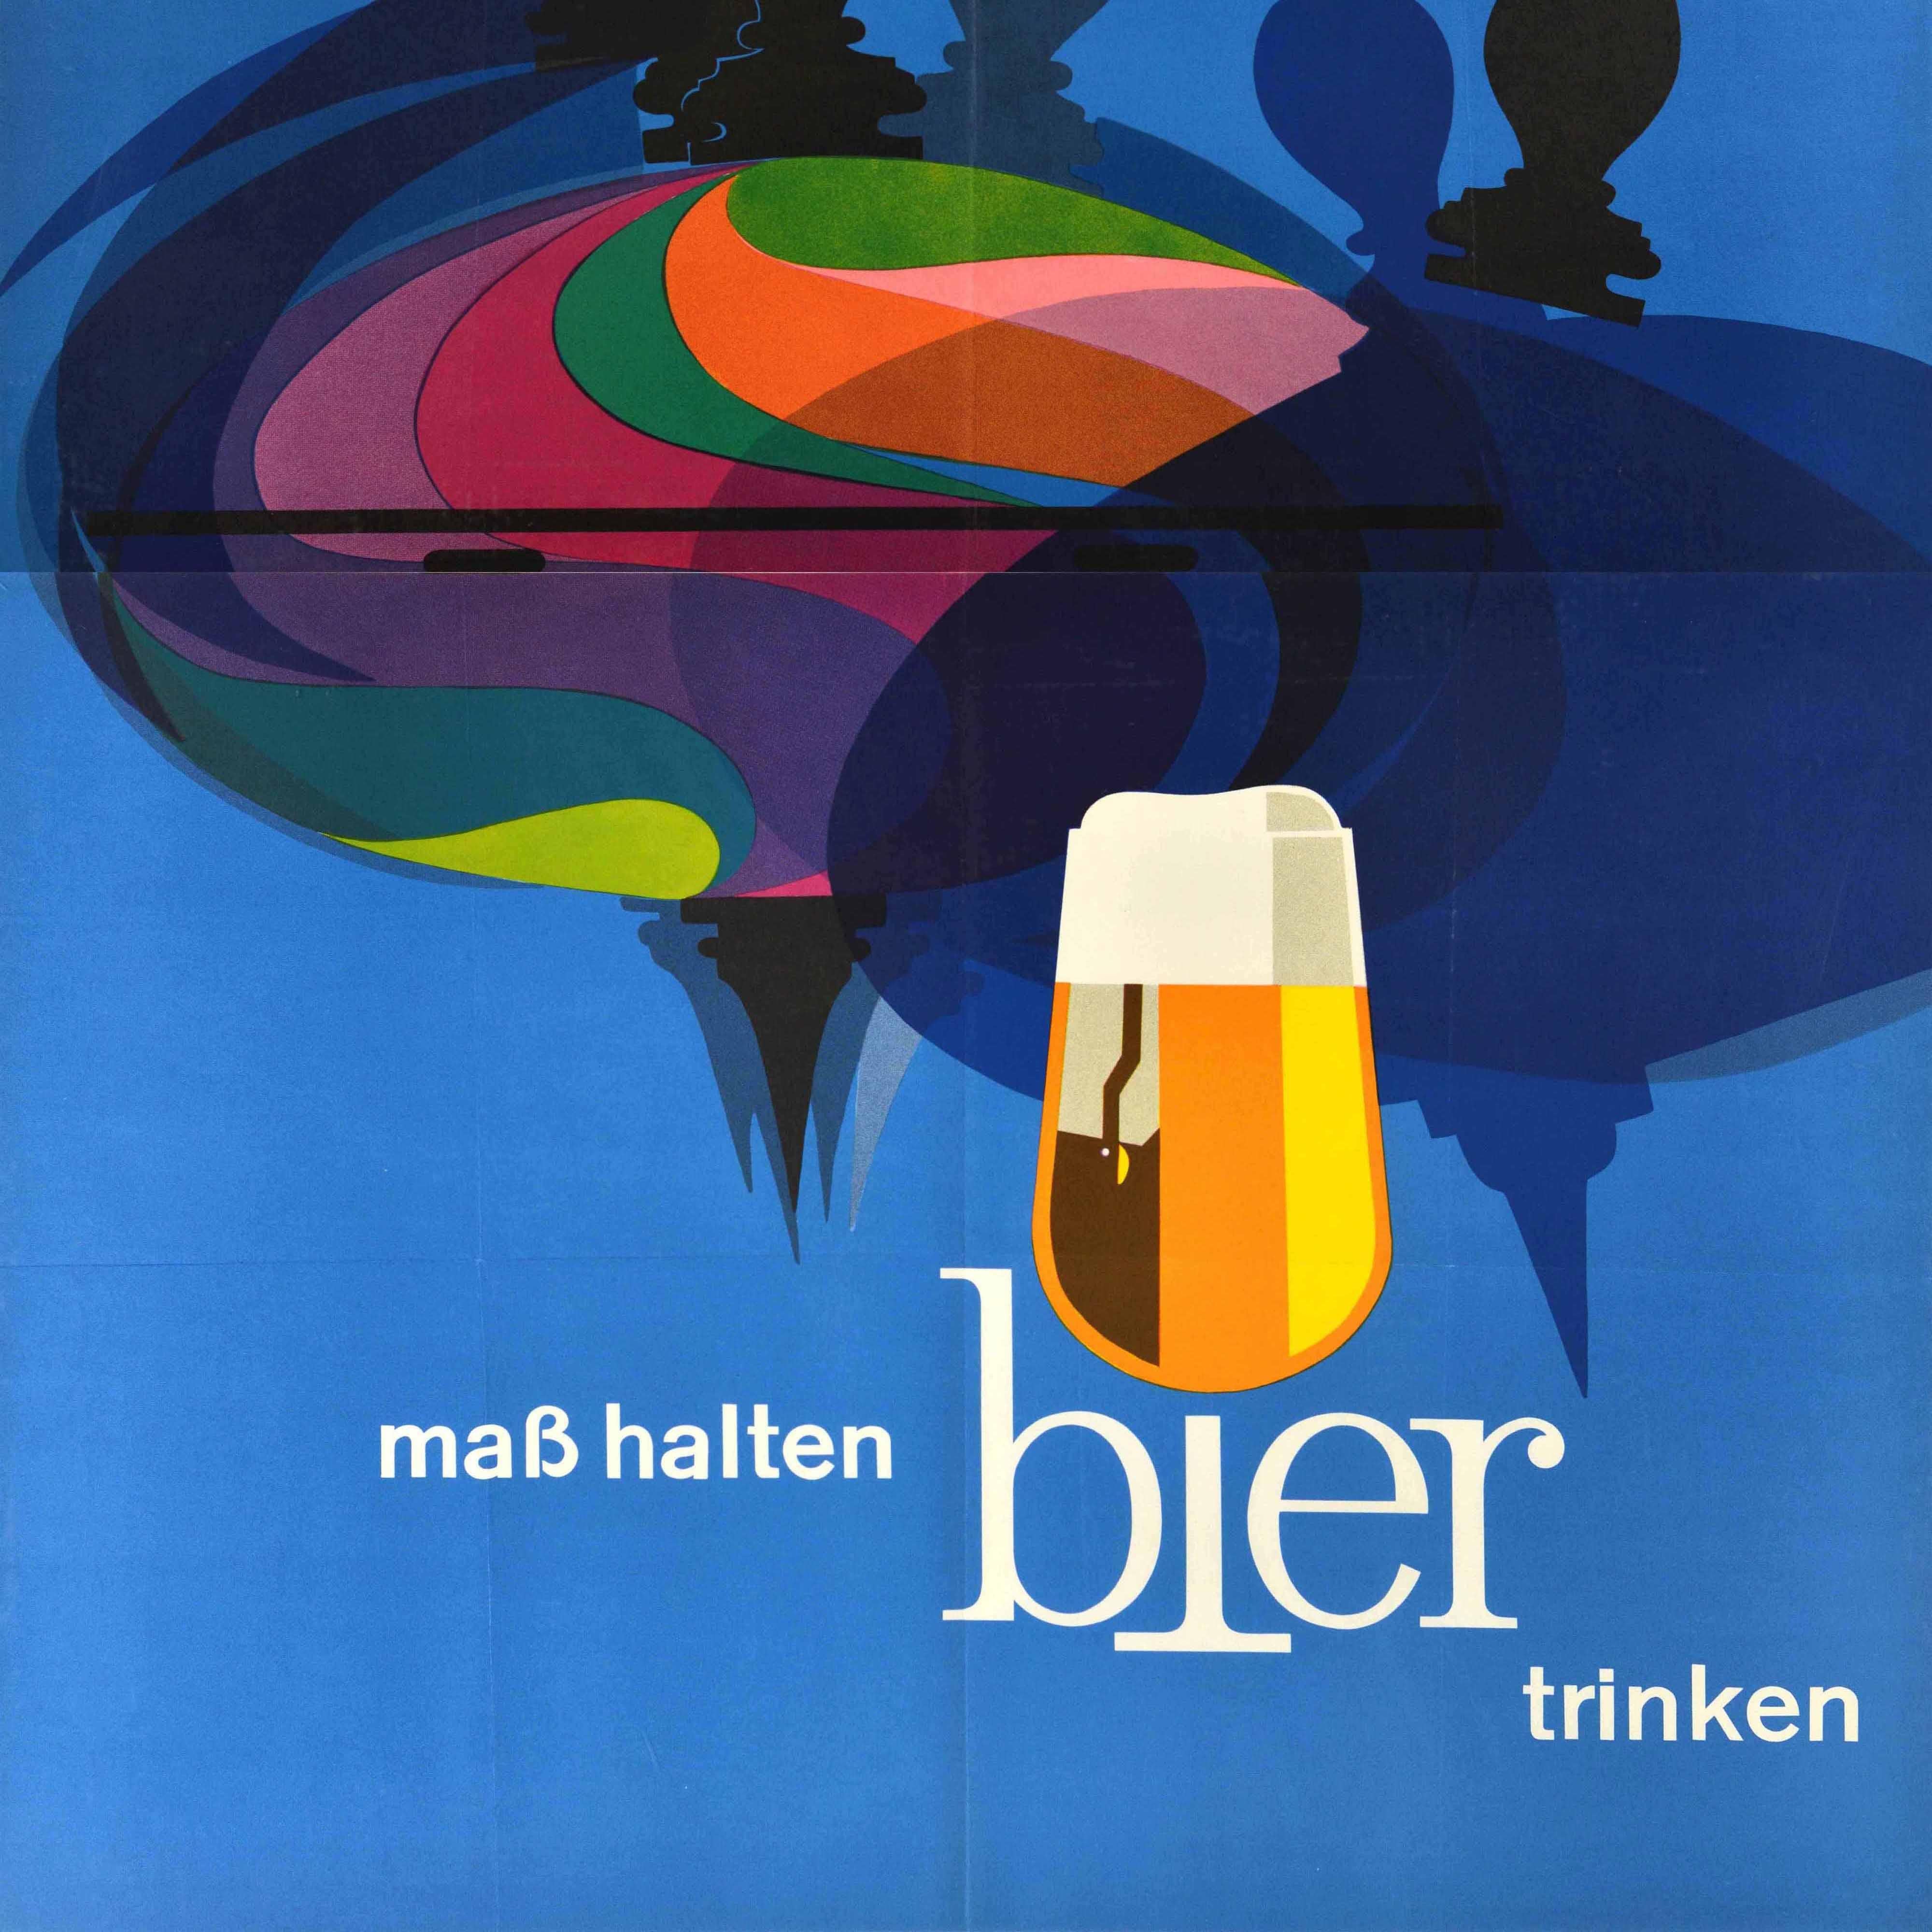 Original vintage advertising poster - Mass halten bier trinken / Drink beer moderately - featuring a great design depicting a colourful spinning top toy and the shadows on a blue background, the title text and a beer glass as part of the i in bier